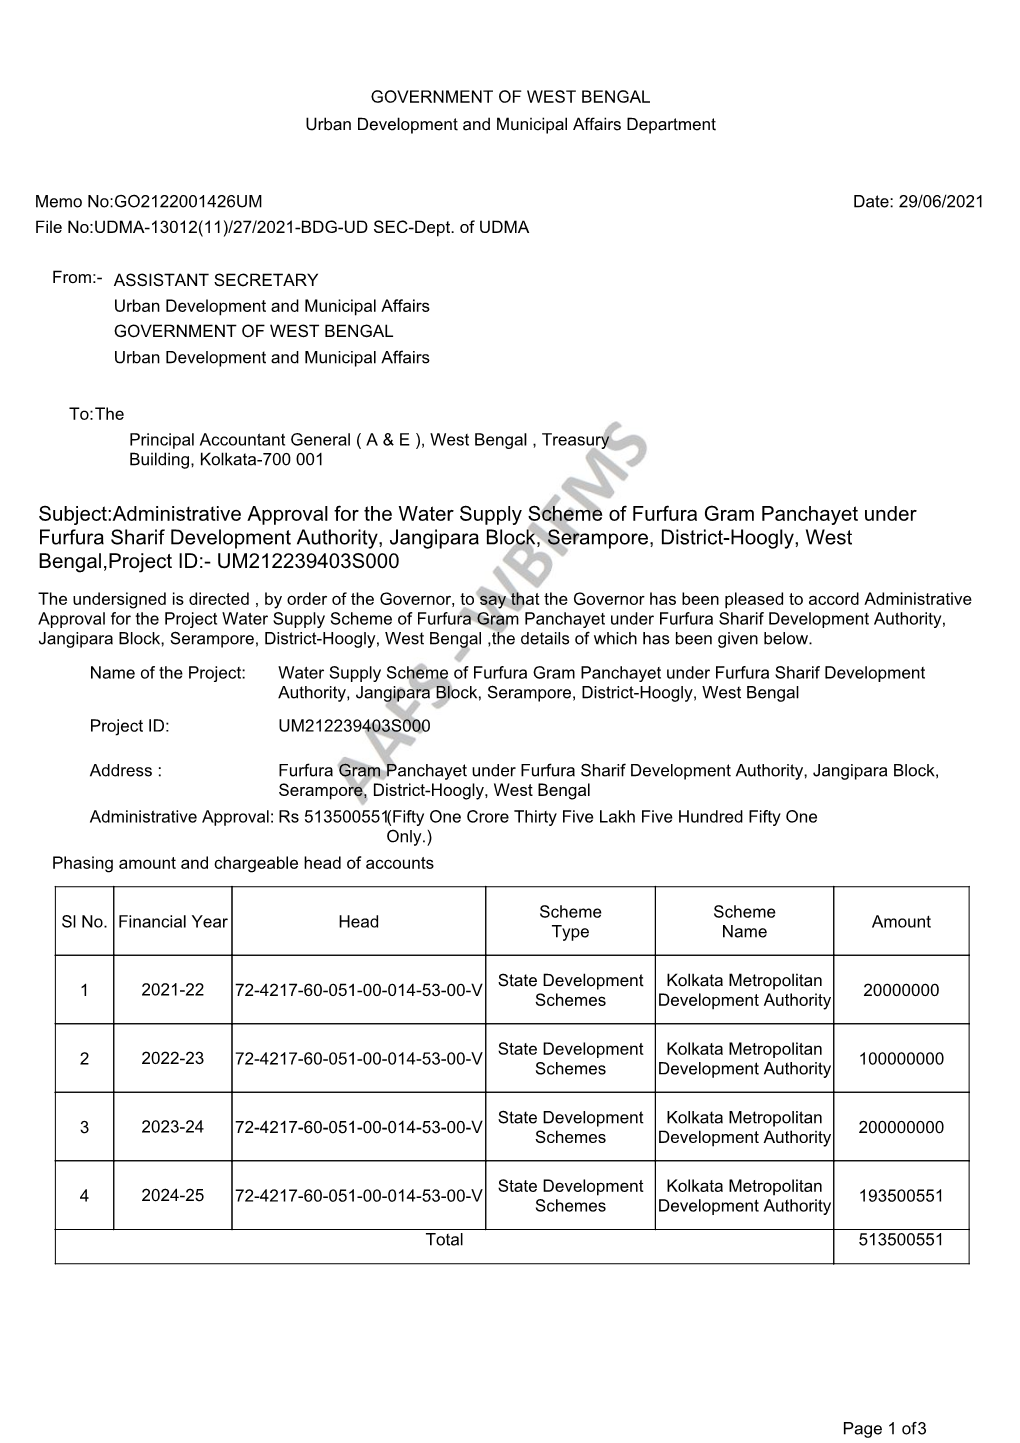 Subject:Administrative Approval for the Water Supply Scheme Of